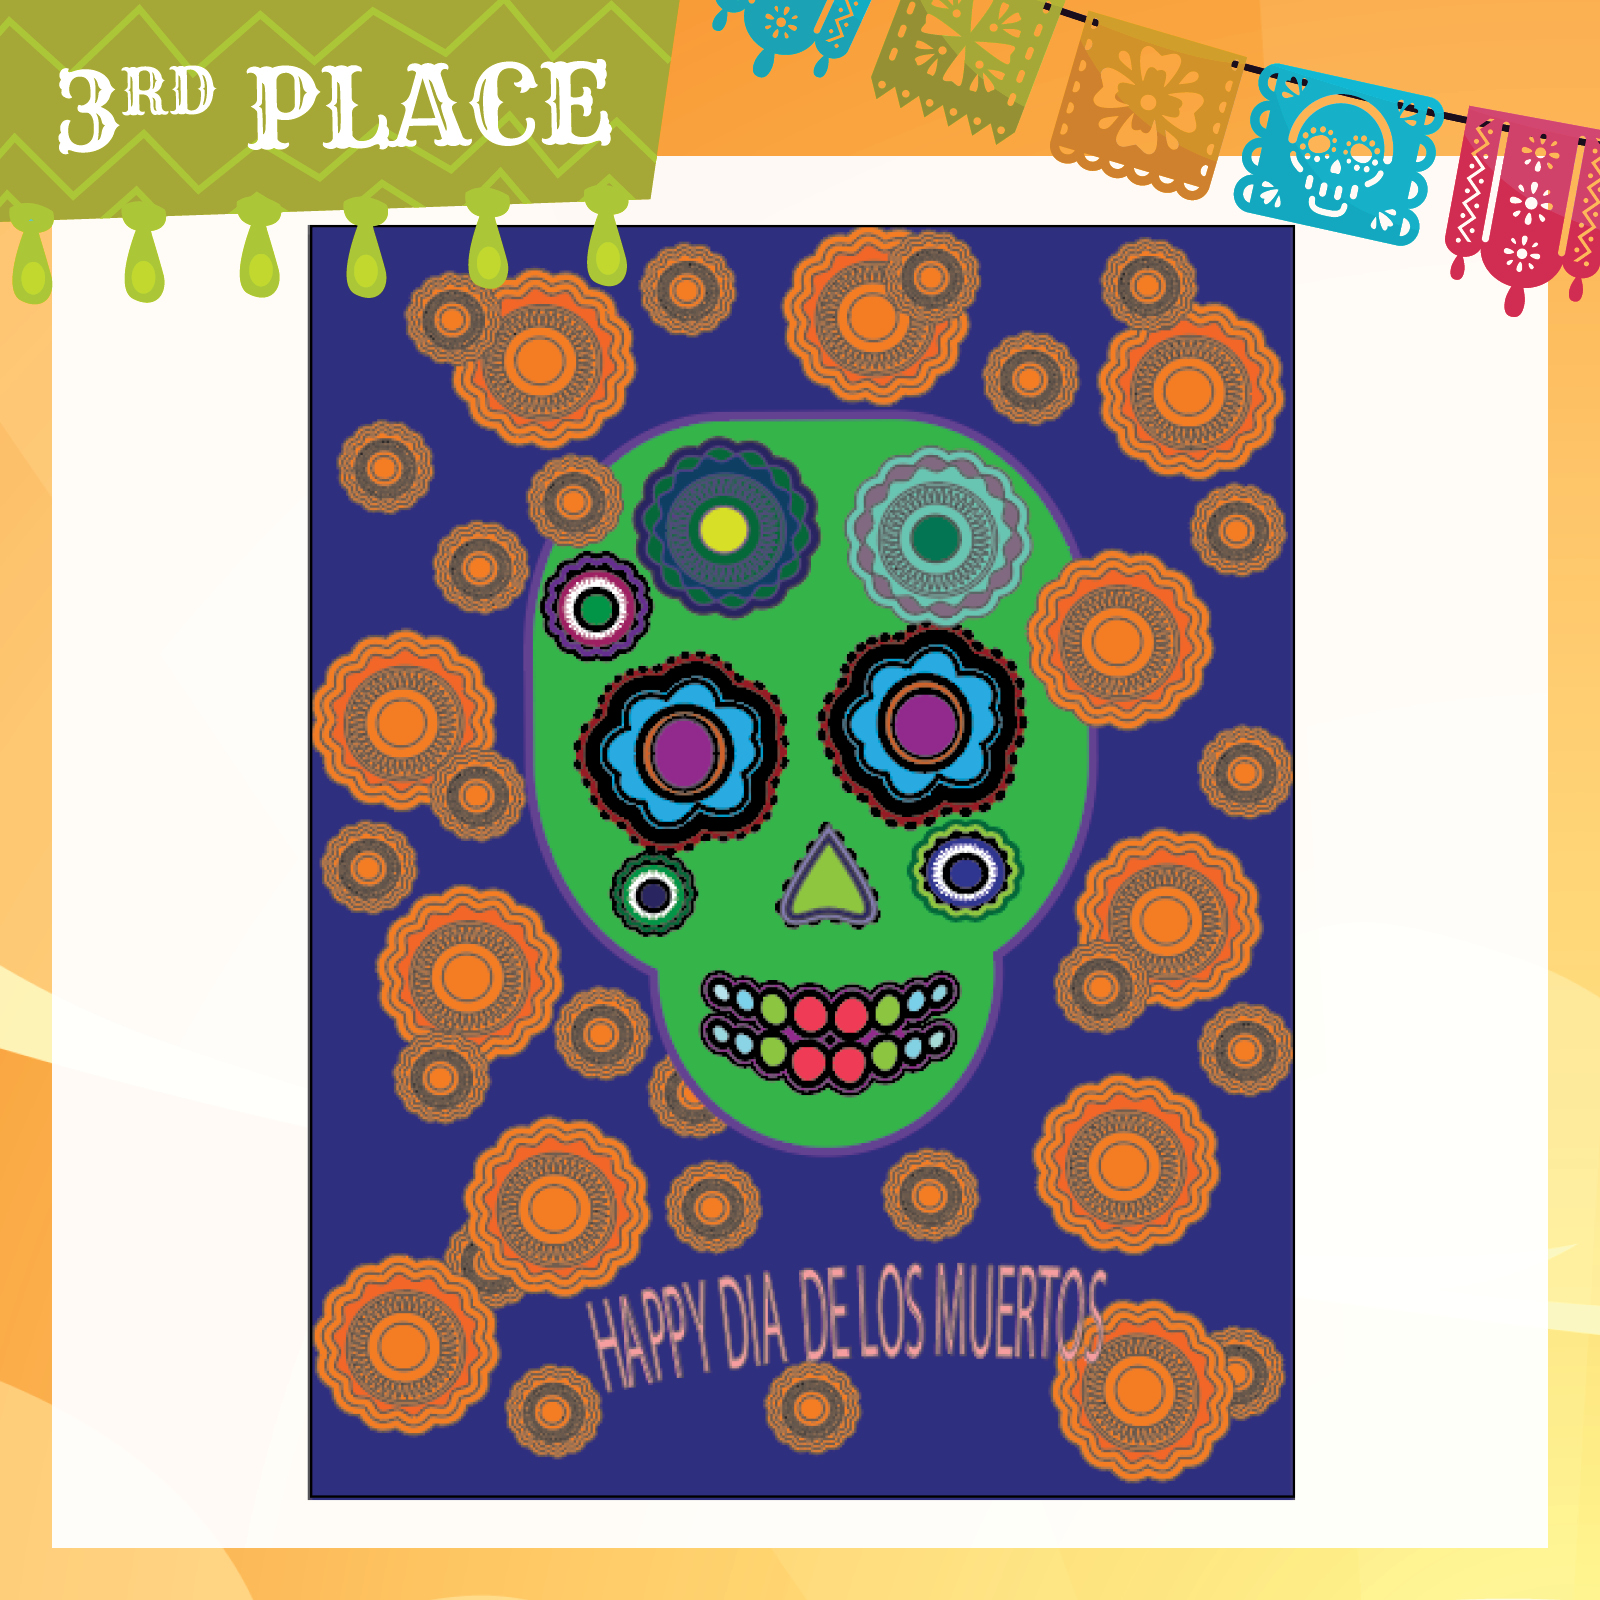 Green skull with flowers made of colorful geometric circles on purple background